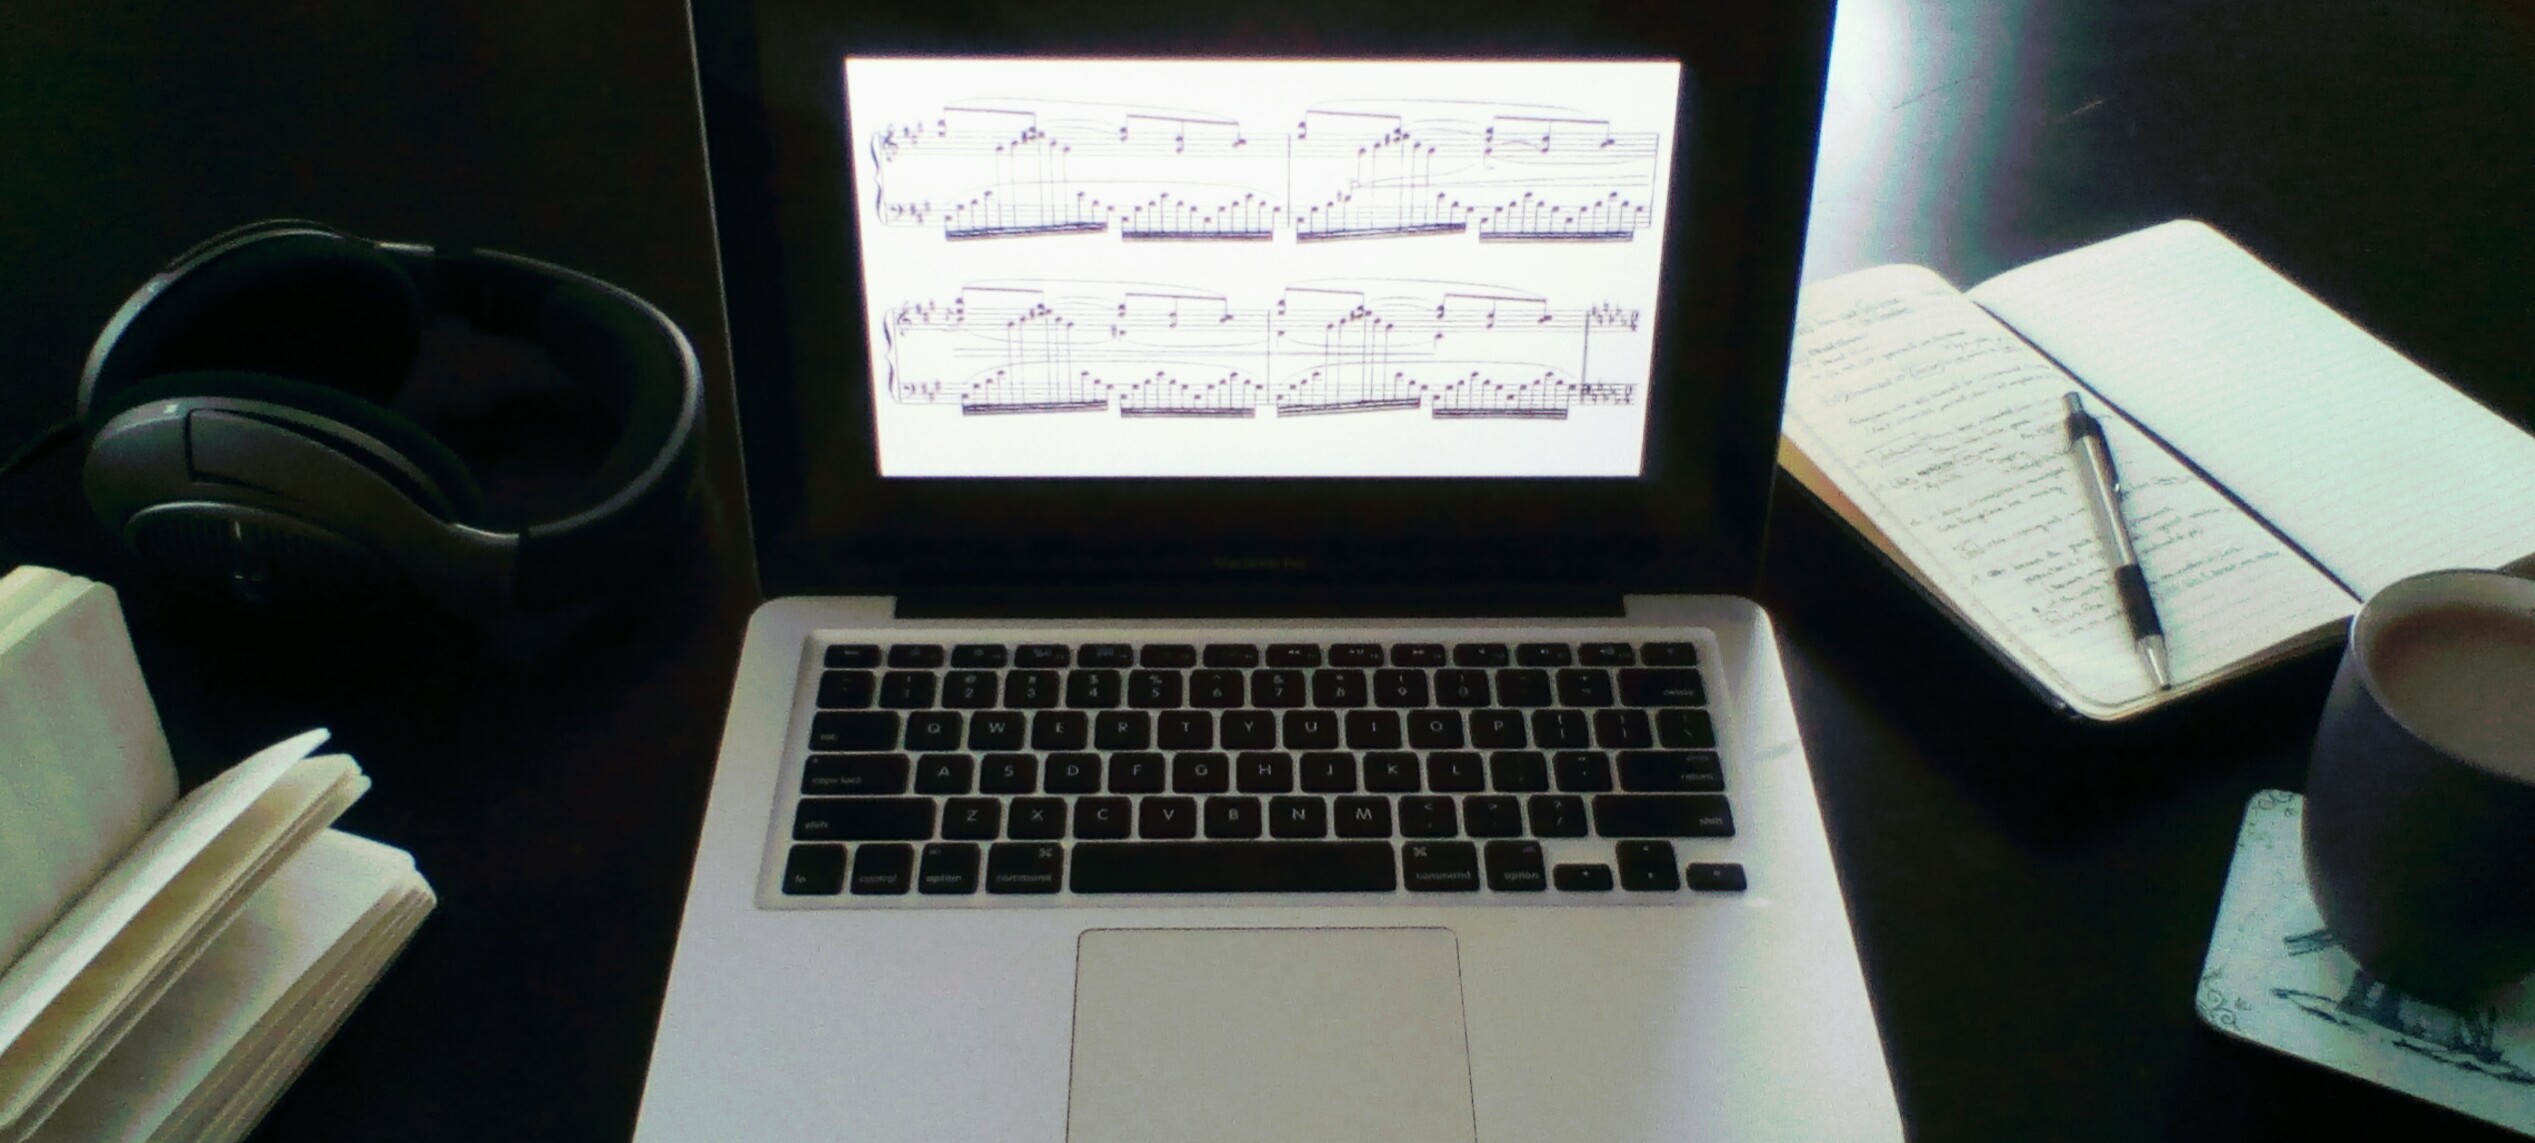 Composer's workspace